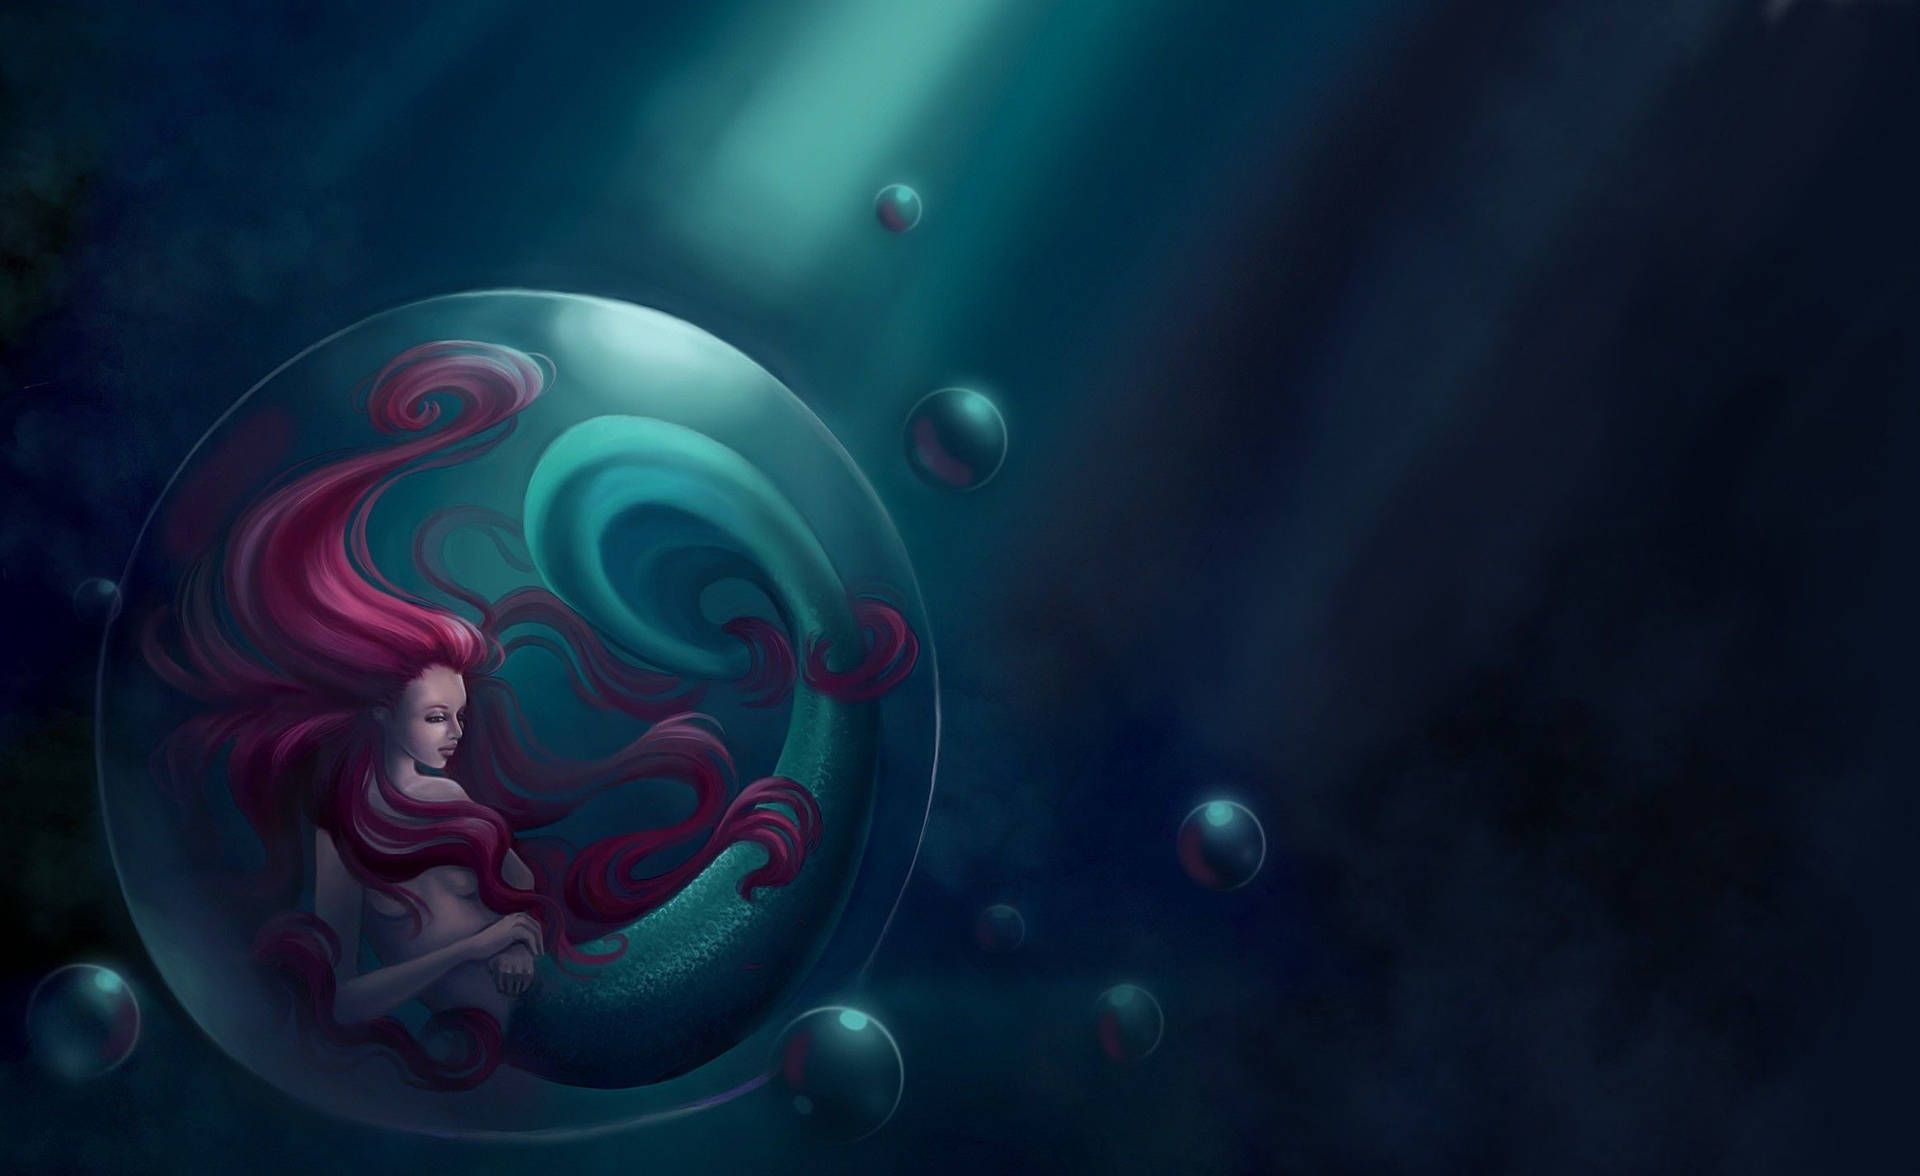 Download The Little Mermaid The Royal Queen Wallpaper